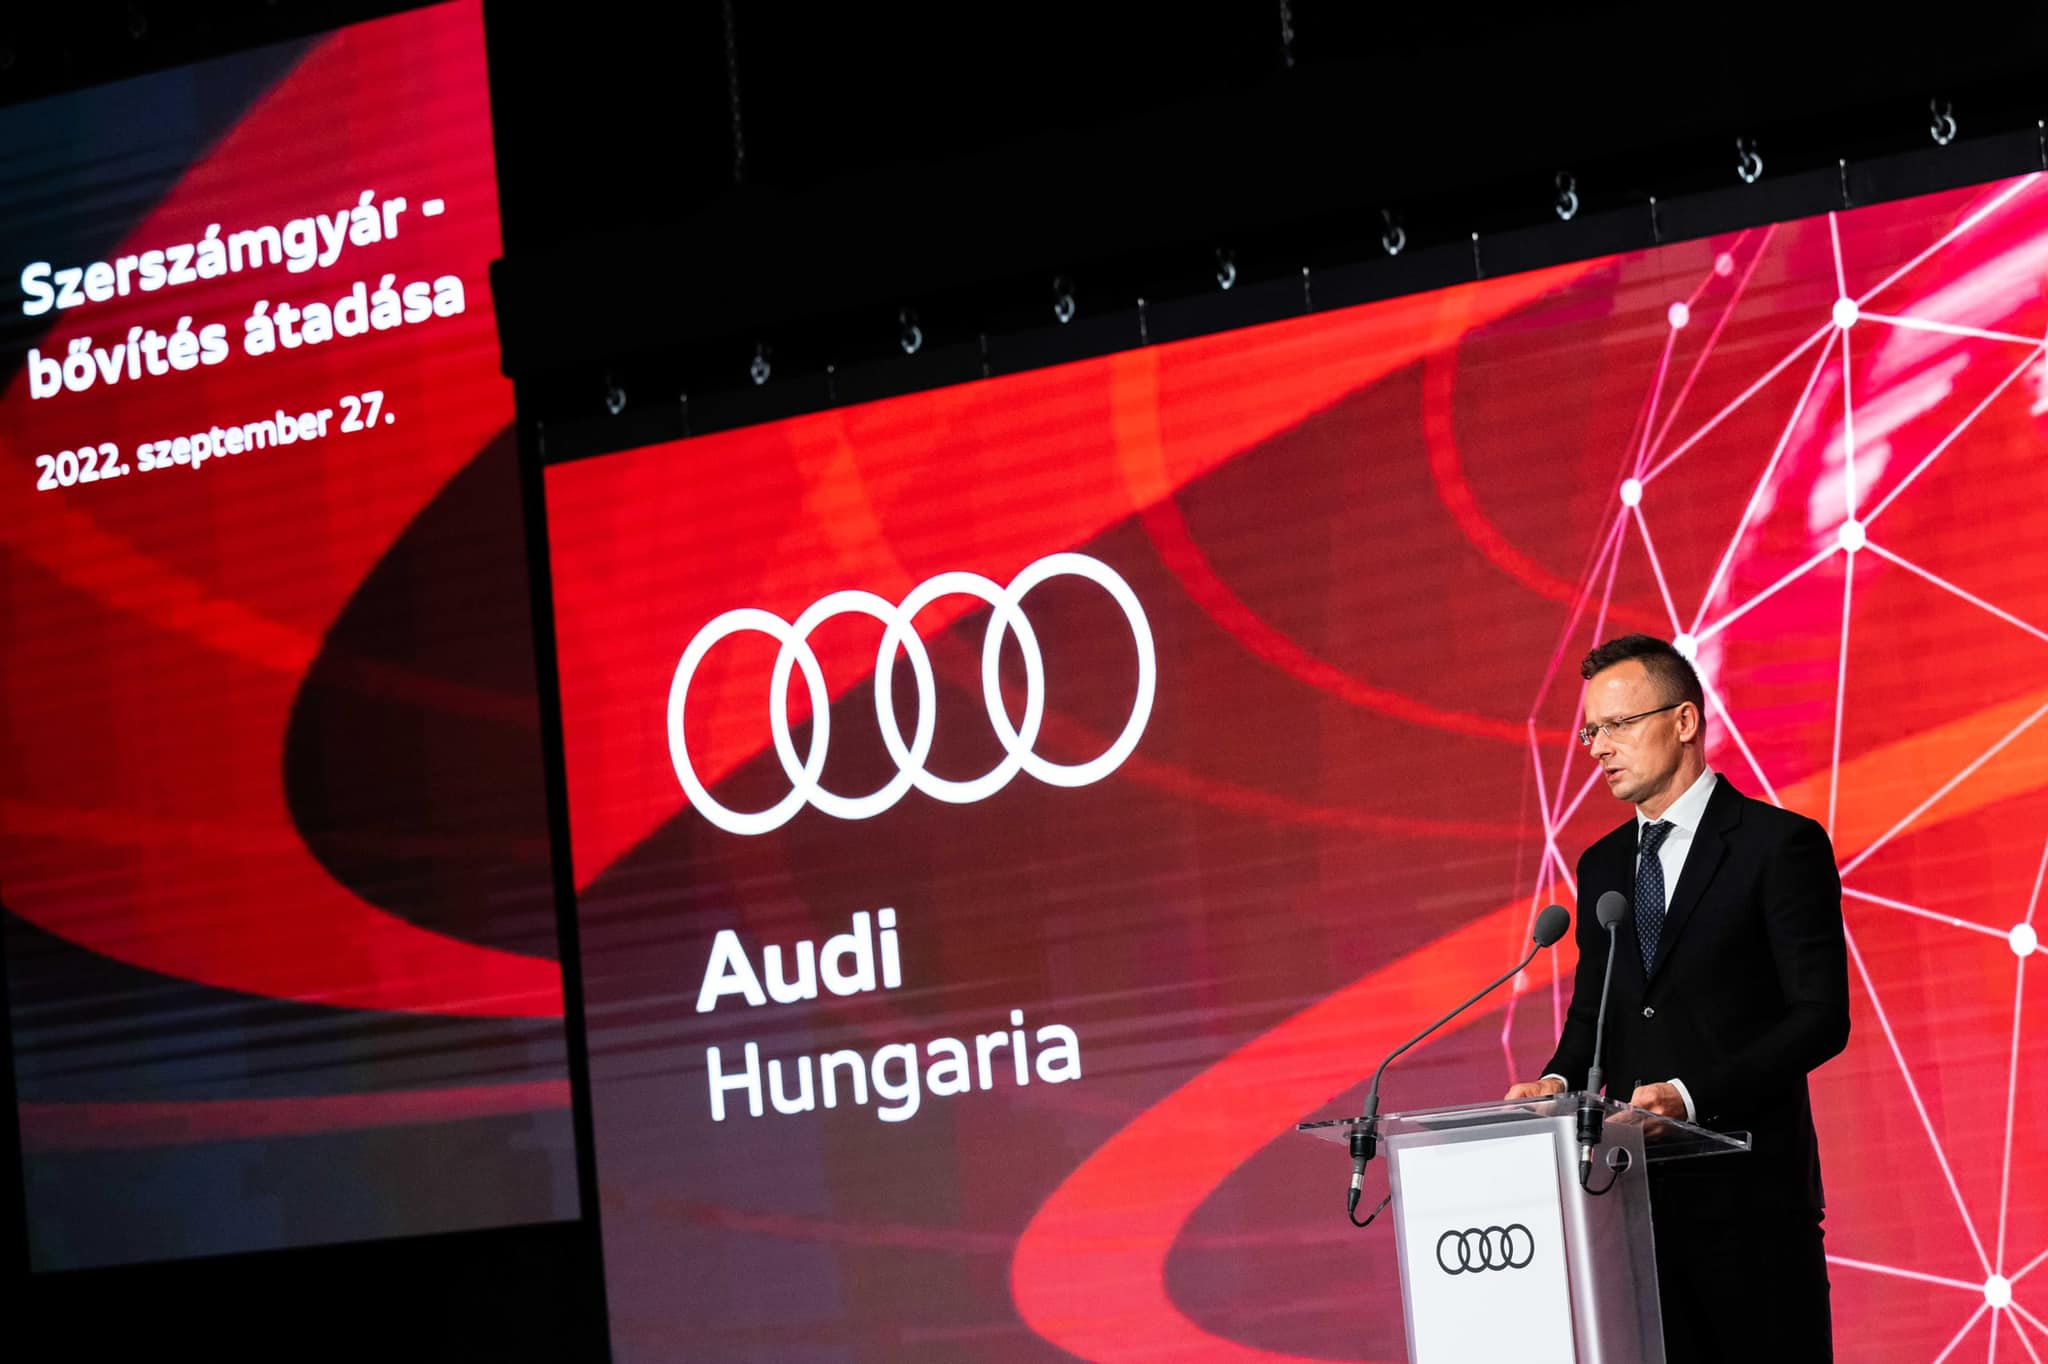 Car Industry Output in Hungary Up 13% in First Seven Months Of 2022, According to Szijjártó